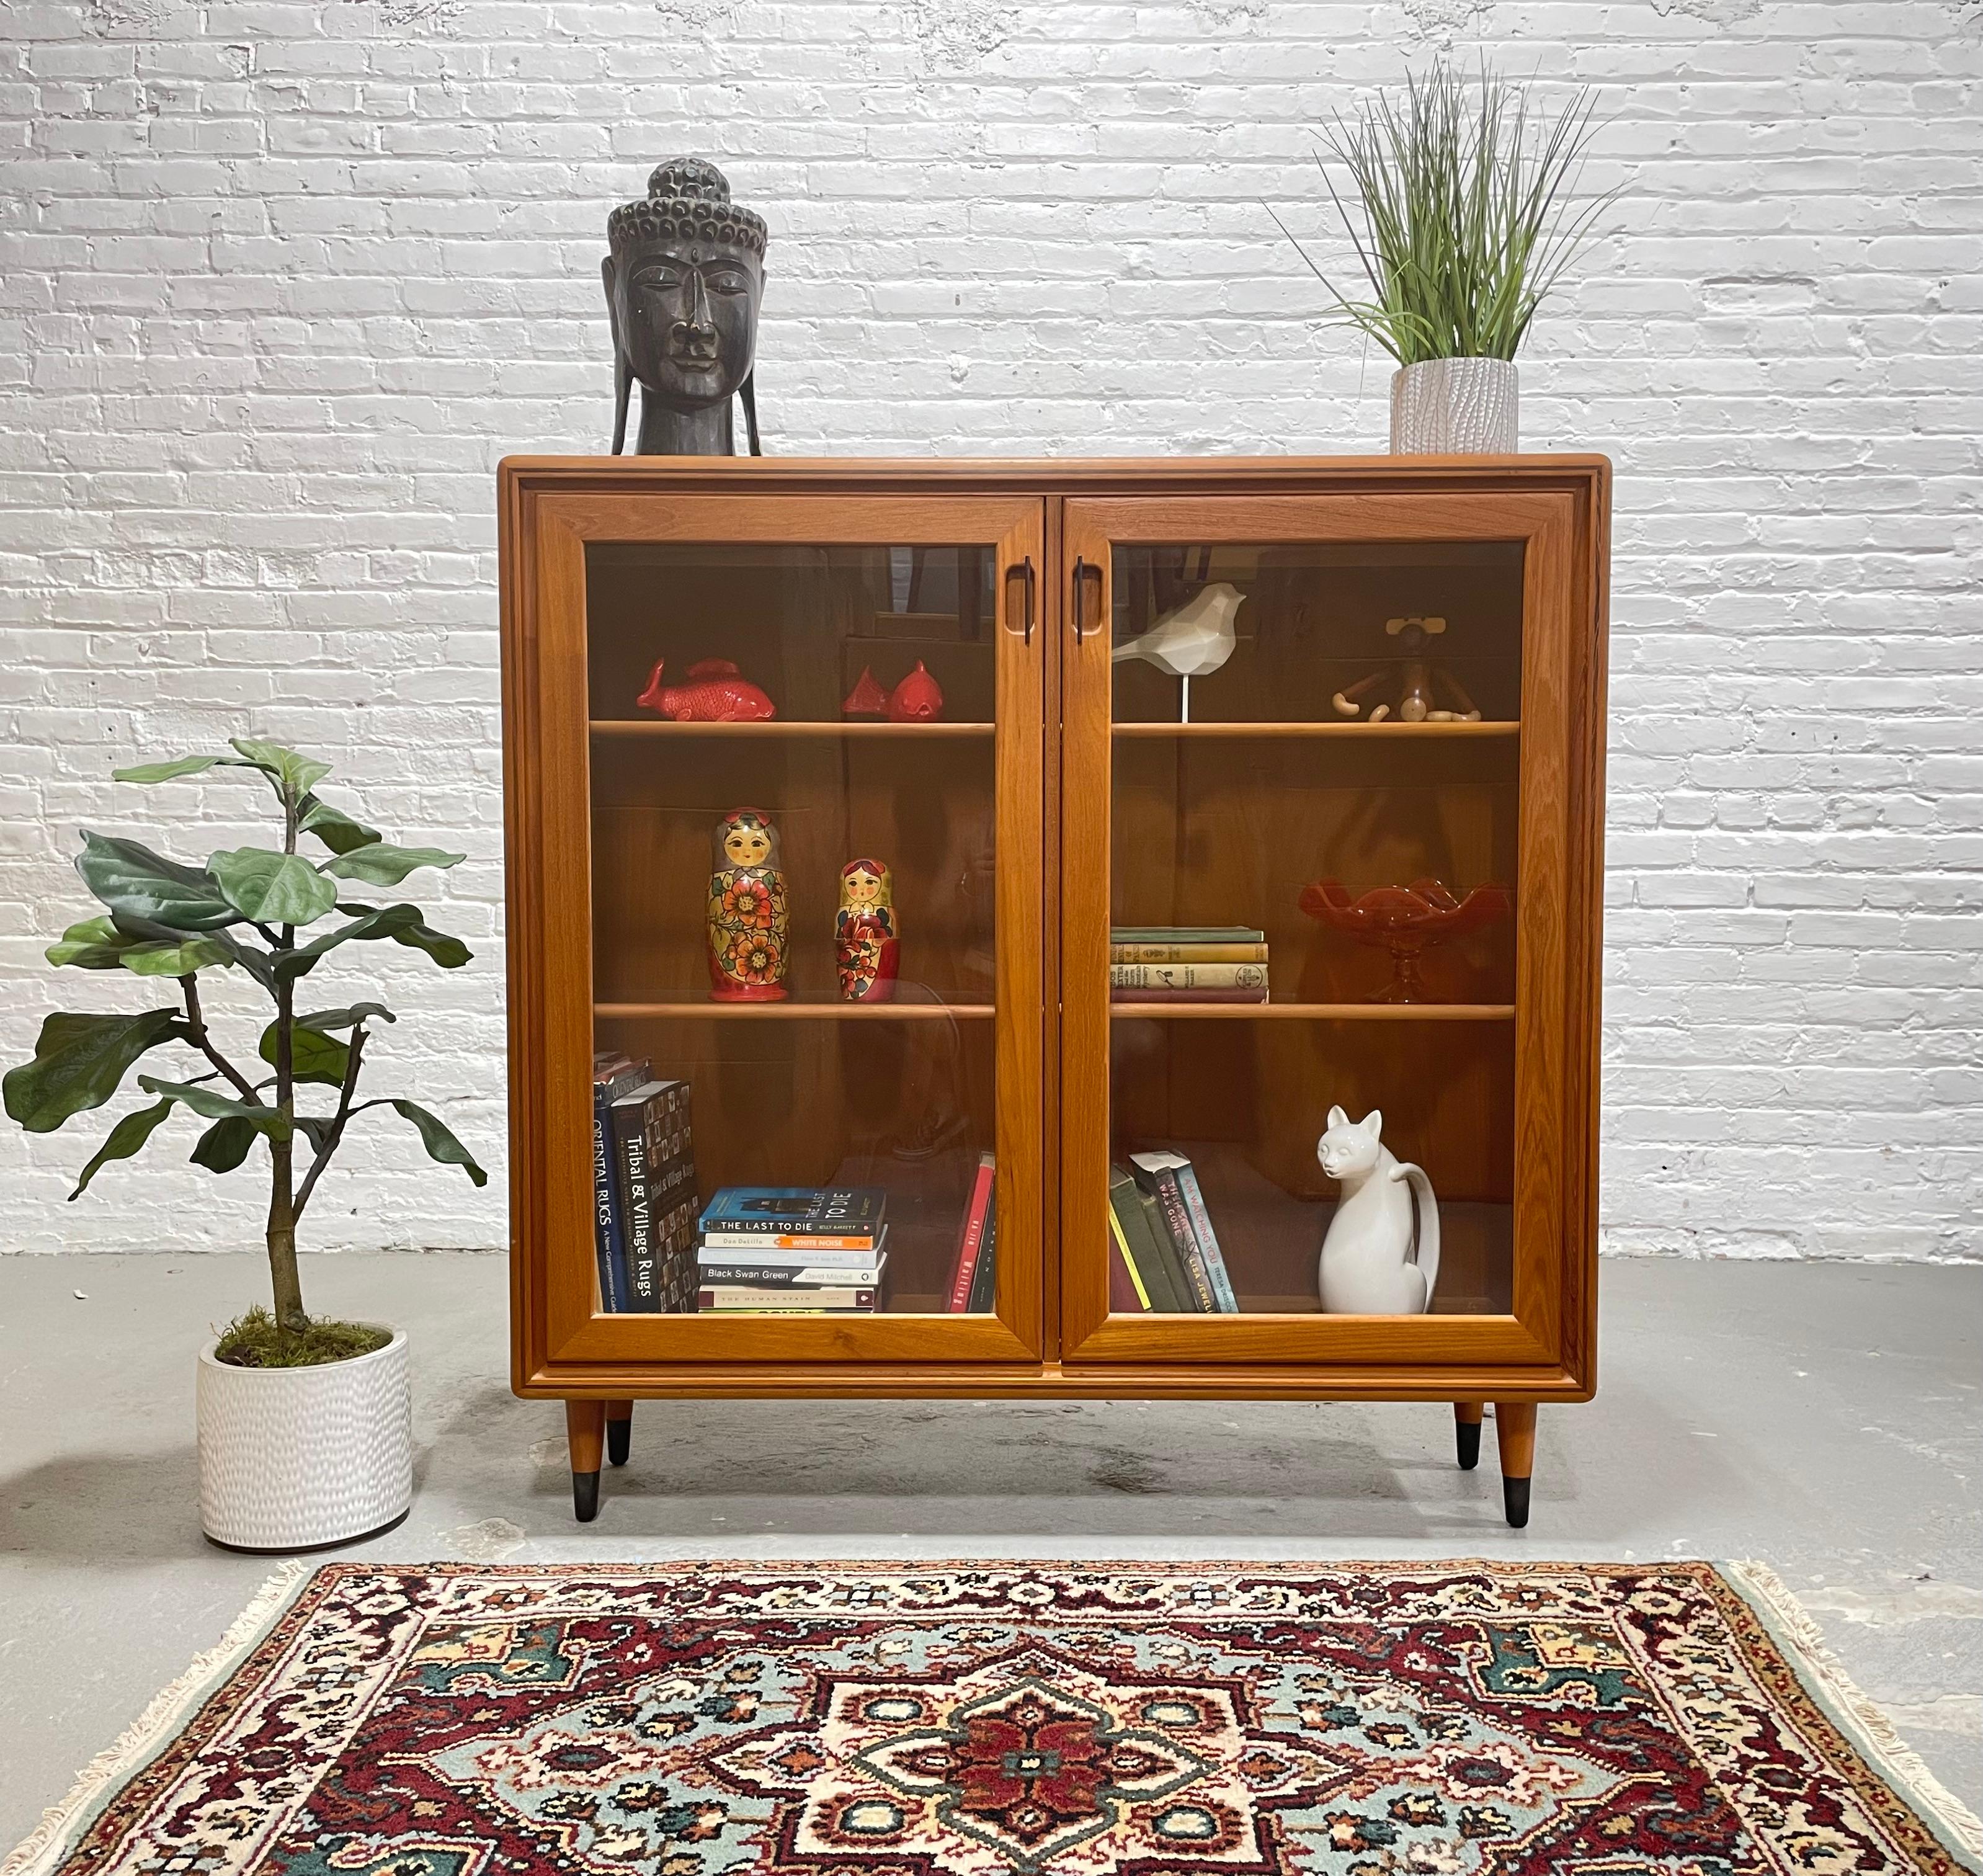 Mid Century Modern Teak Bookcase, Made in Denmark, c. 1960’s.  Not only does this beauty offer loads of storage for all your books and collectables, but it also lights up and would make an amazing bar cabinet.  Tons of gorgeous design details: glass